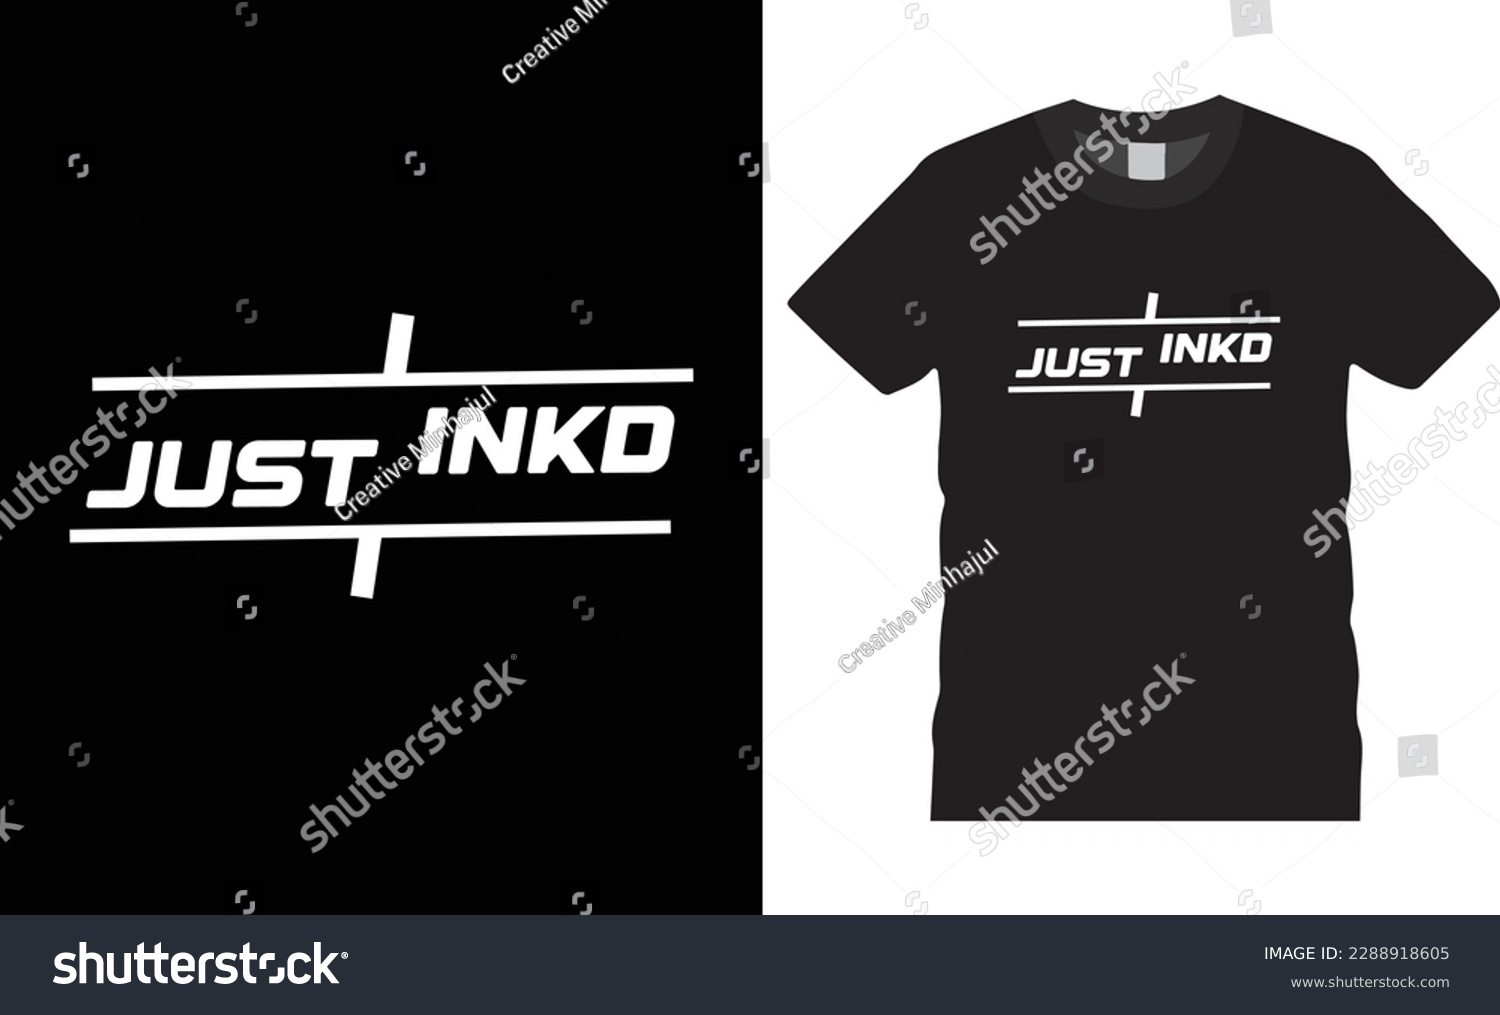 SVG of Just inka SVG typography graphic t-shirt design. Fully editable vector graphic prints, vector illustration print ready file. svg